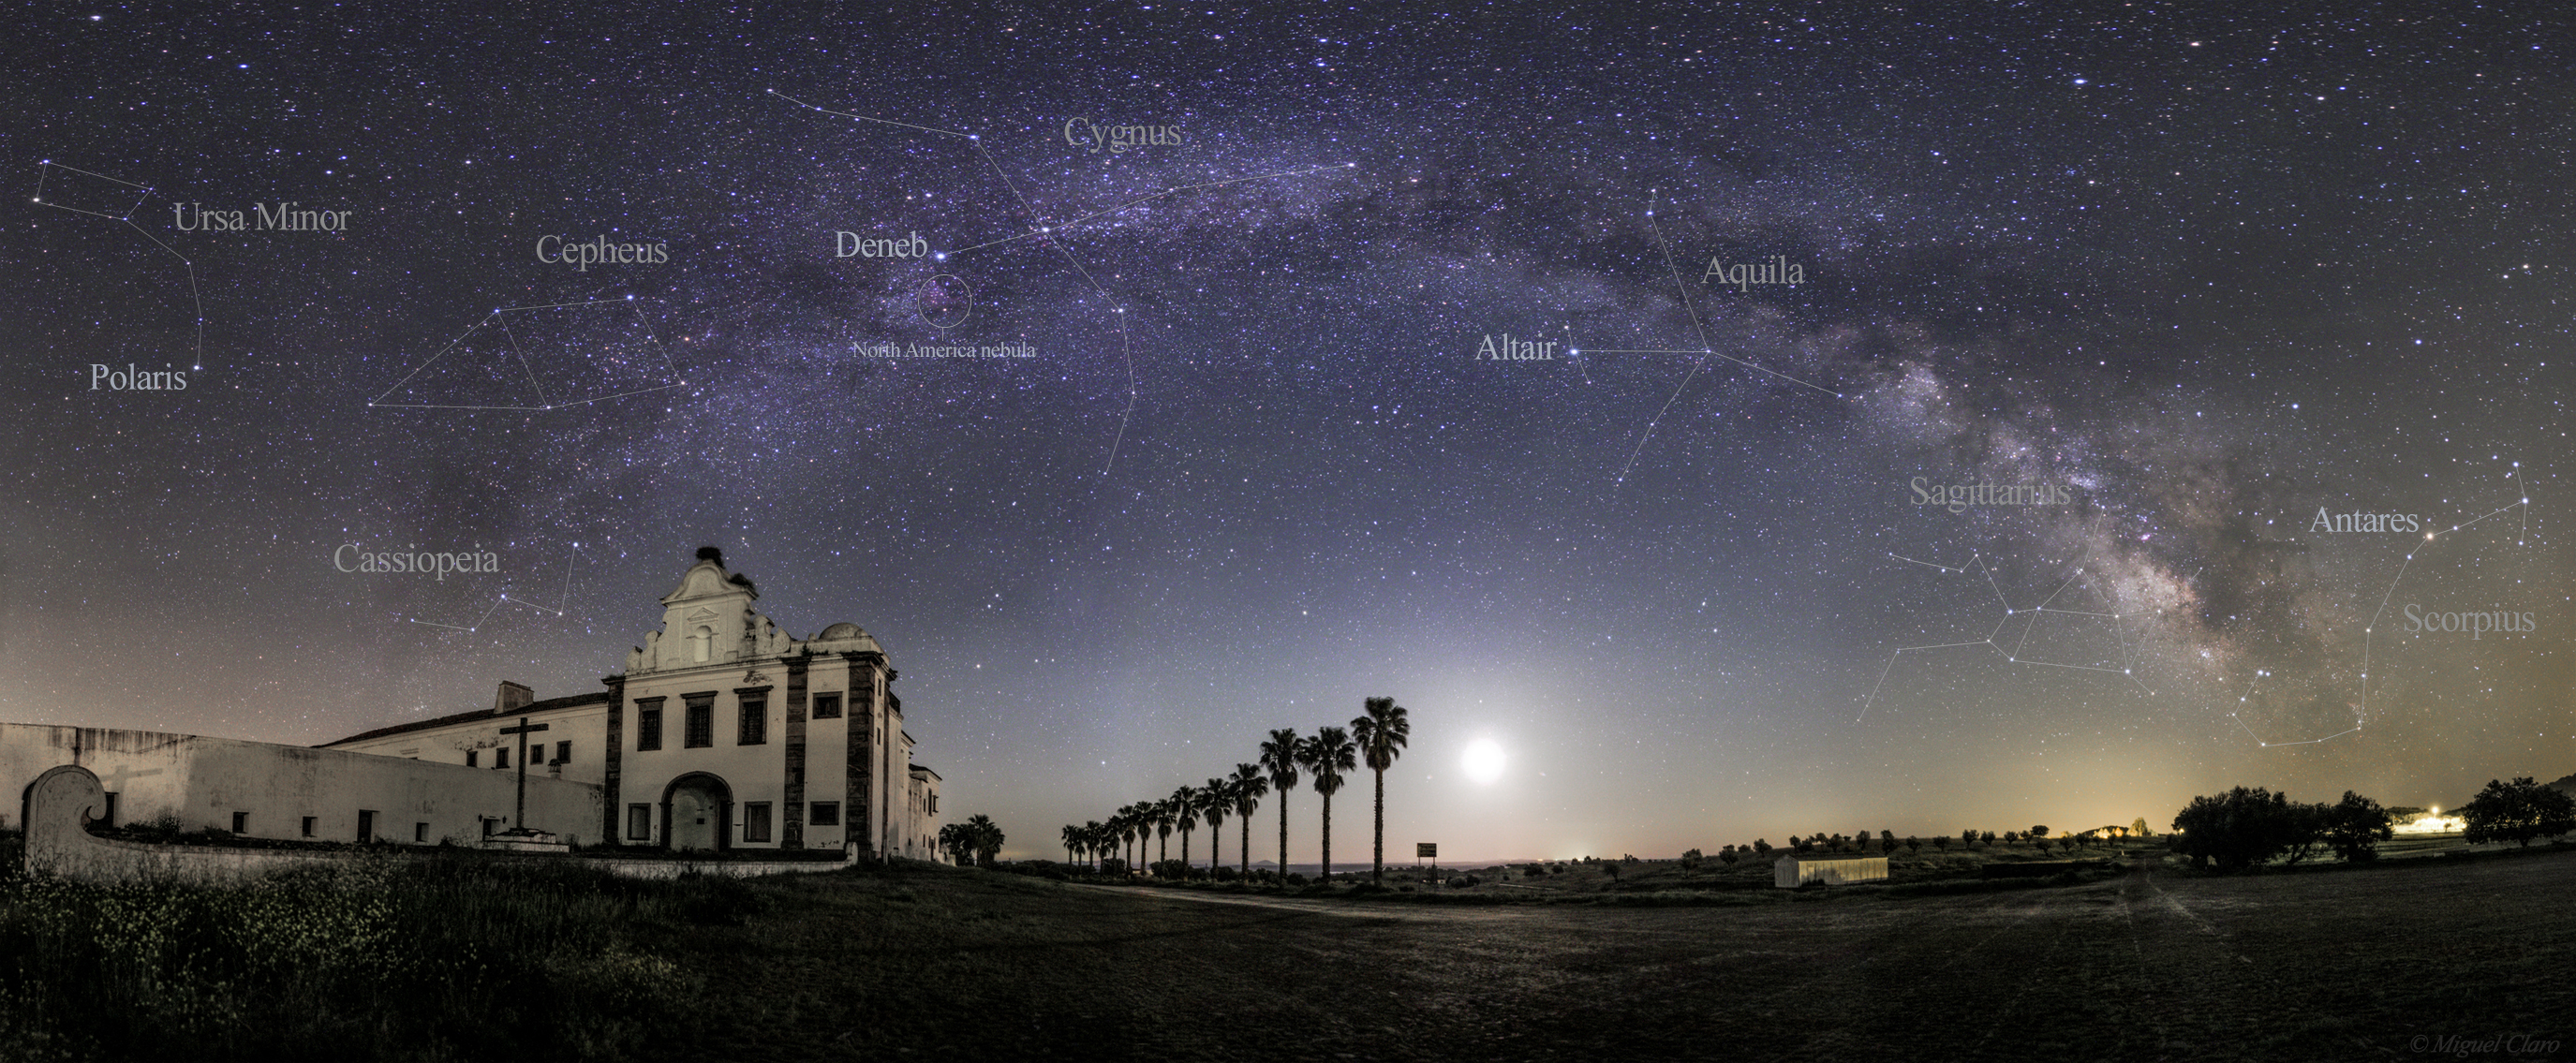 General 2750x1135 nature landscape Milky Way night stars starry night panorama palm trees Portugal cathedral Moon moonlight constellations trees Miguel Claro field